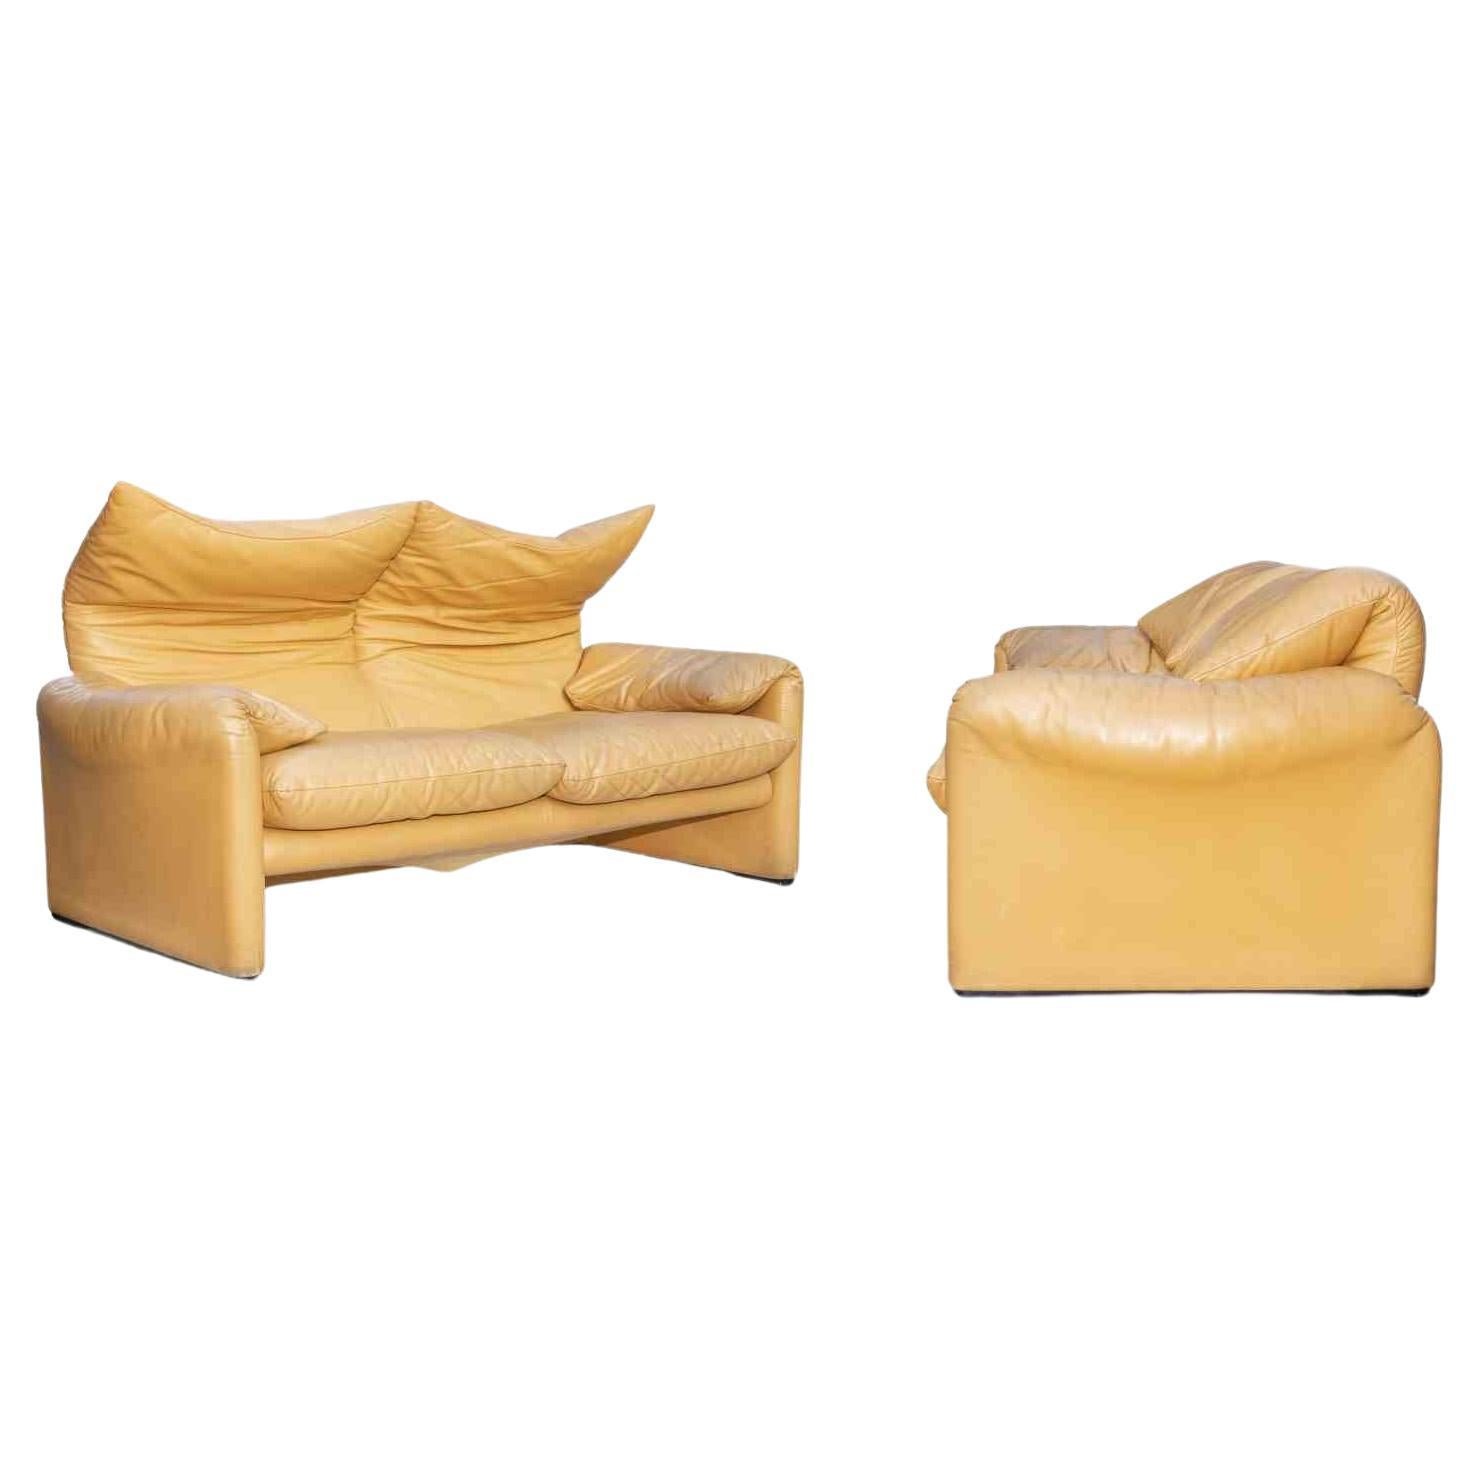 Pair of Maralunga Sofas by Vico Magistretti for Cassina, Italy, 1970s